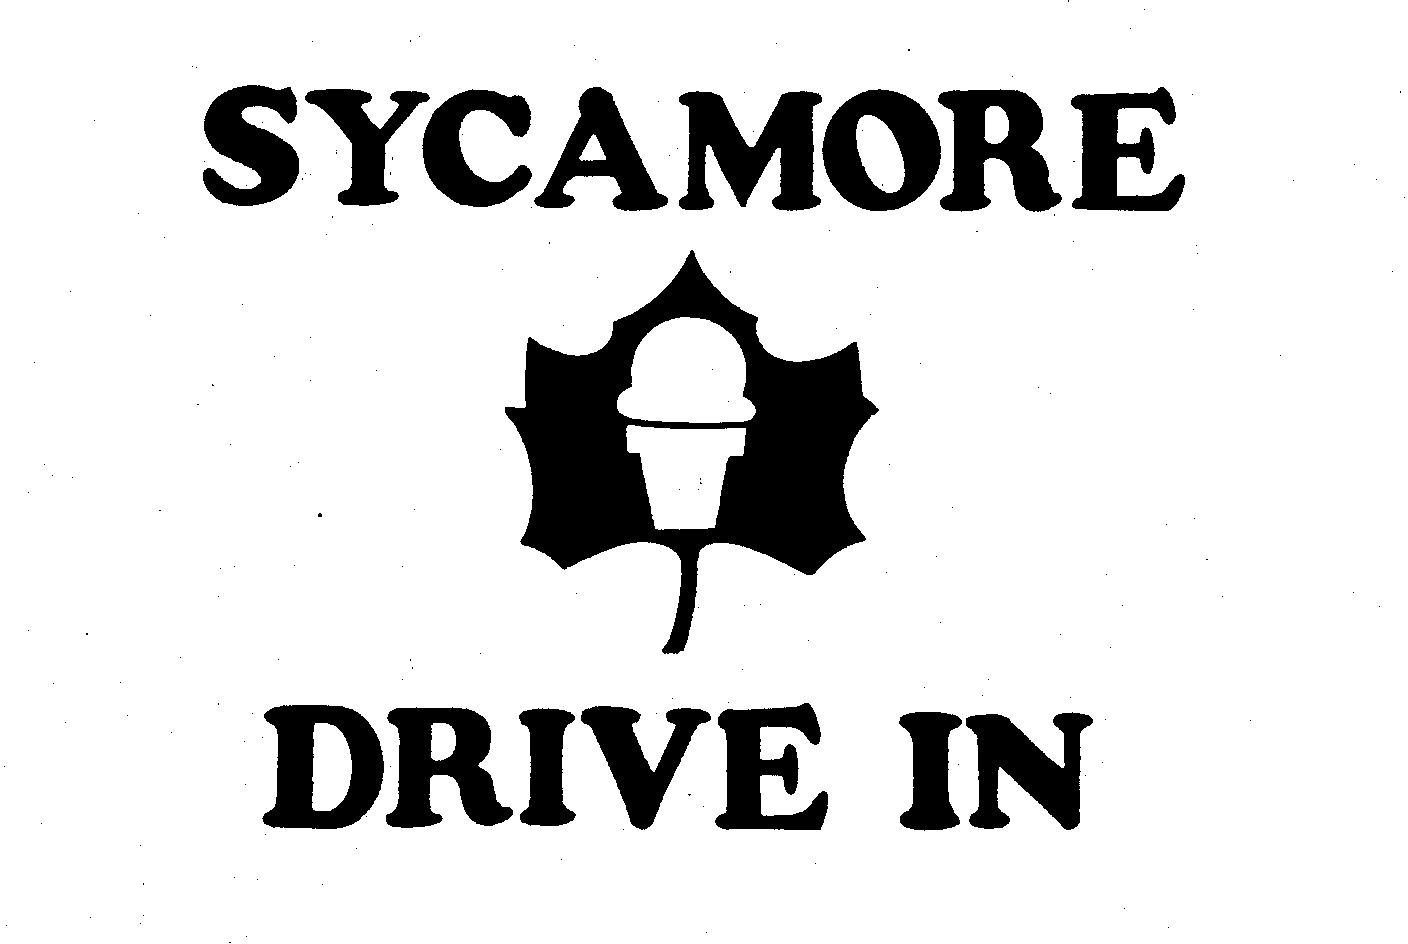  SYCAMORE DRIVE IN